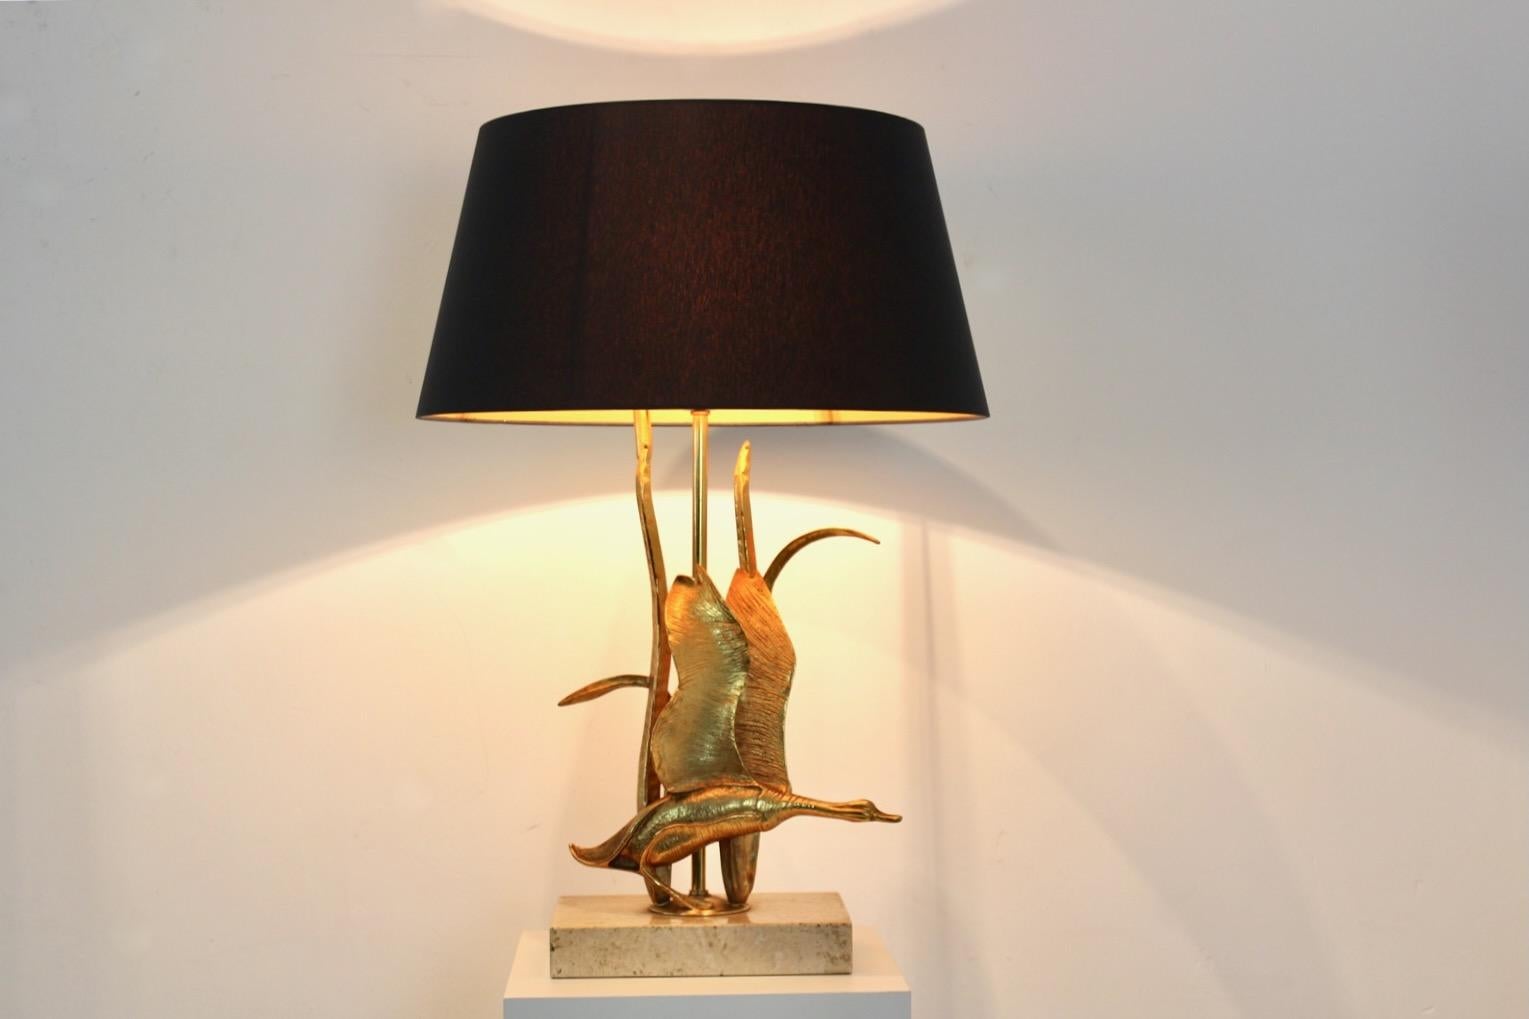 A truly eye catching, unusual Gilt Metal Table (or Floor) Lamp, fashioned in the shape of a Wild Duck. Designed in the style of Maison Jansen and produced circa 1970s in Belgium. The Wild Duck has a beautiful original Patina and the lamp is In very